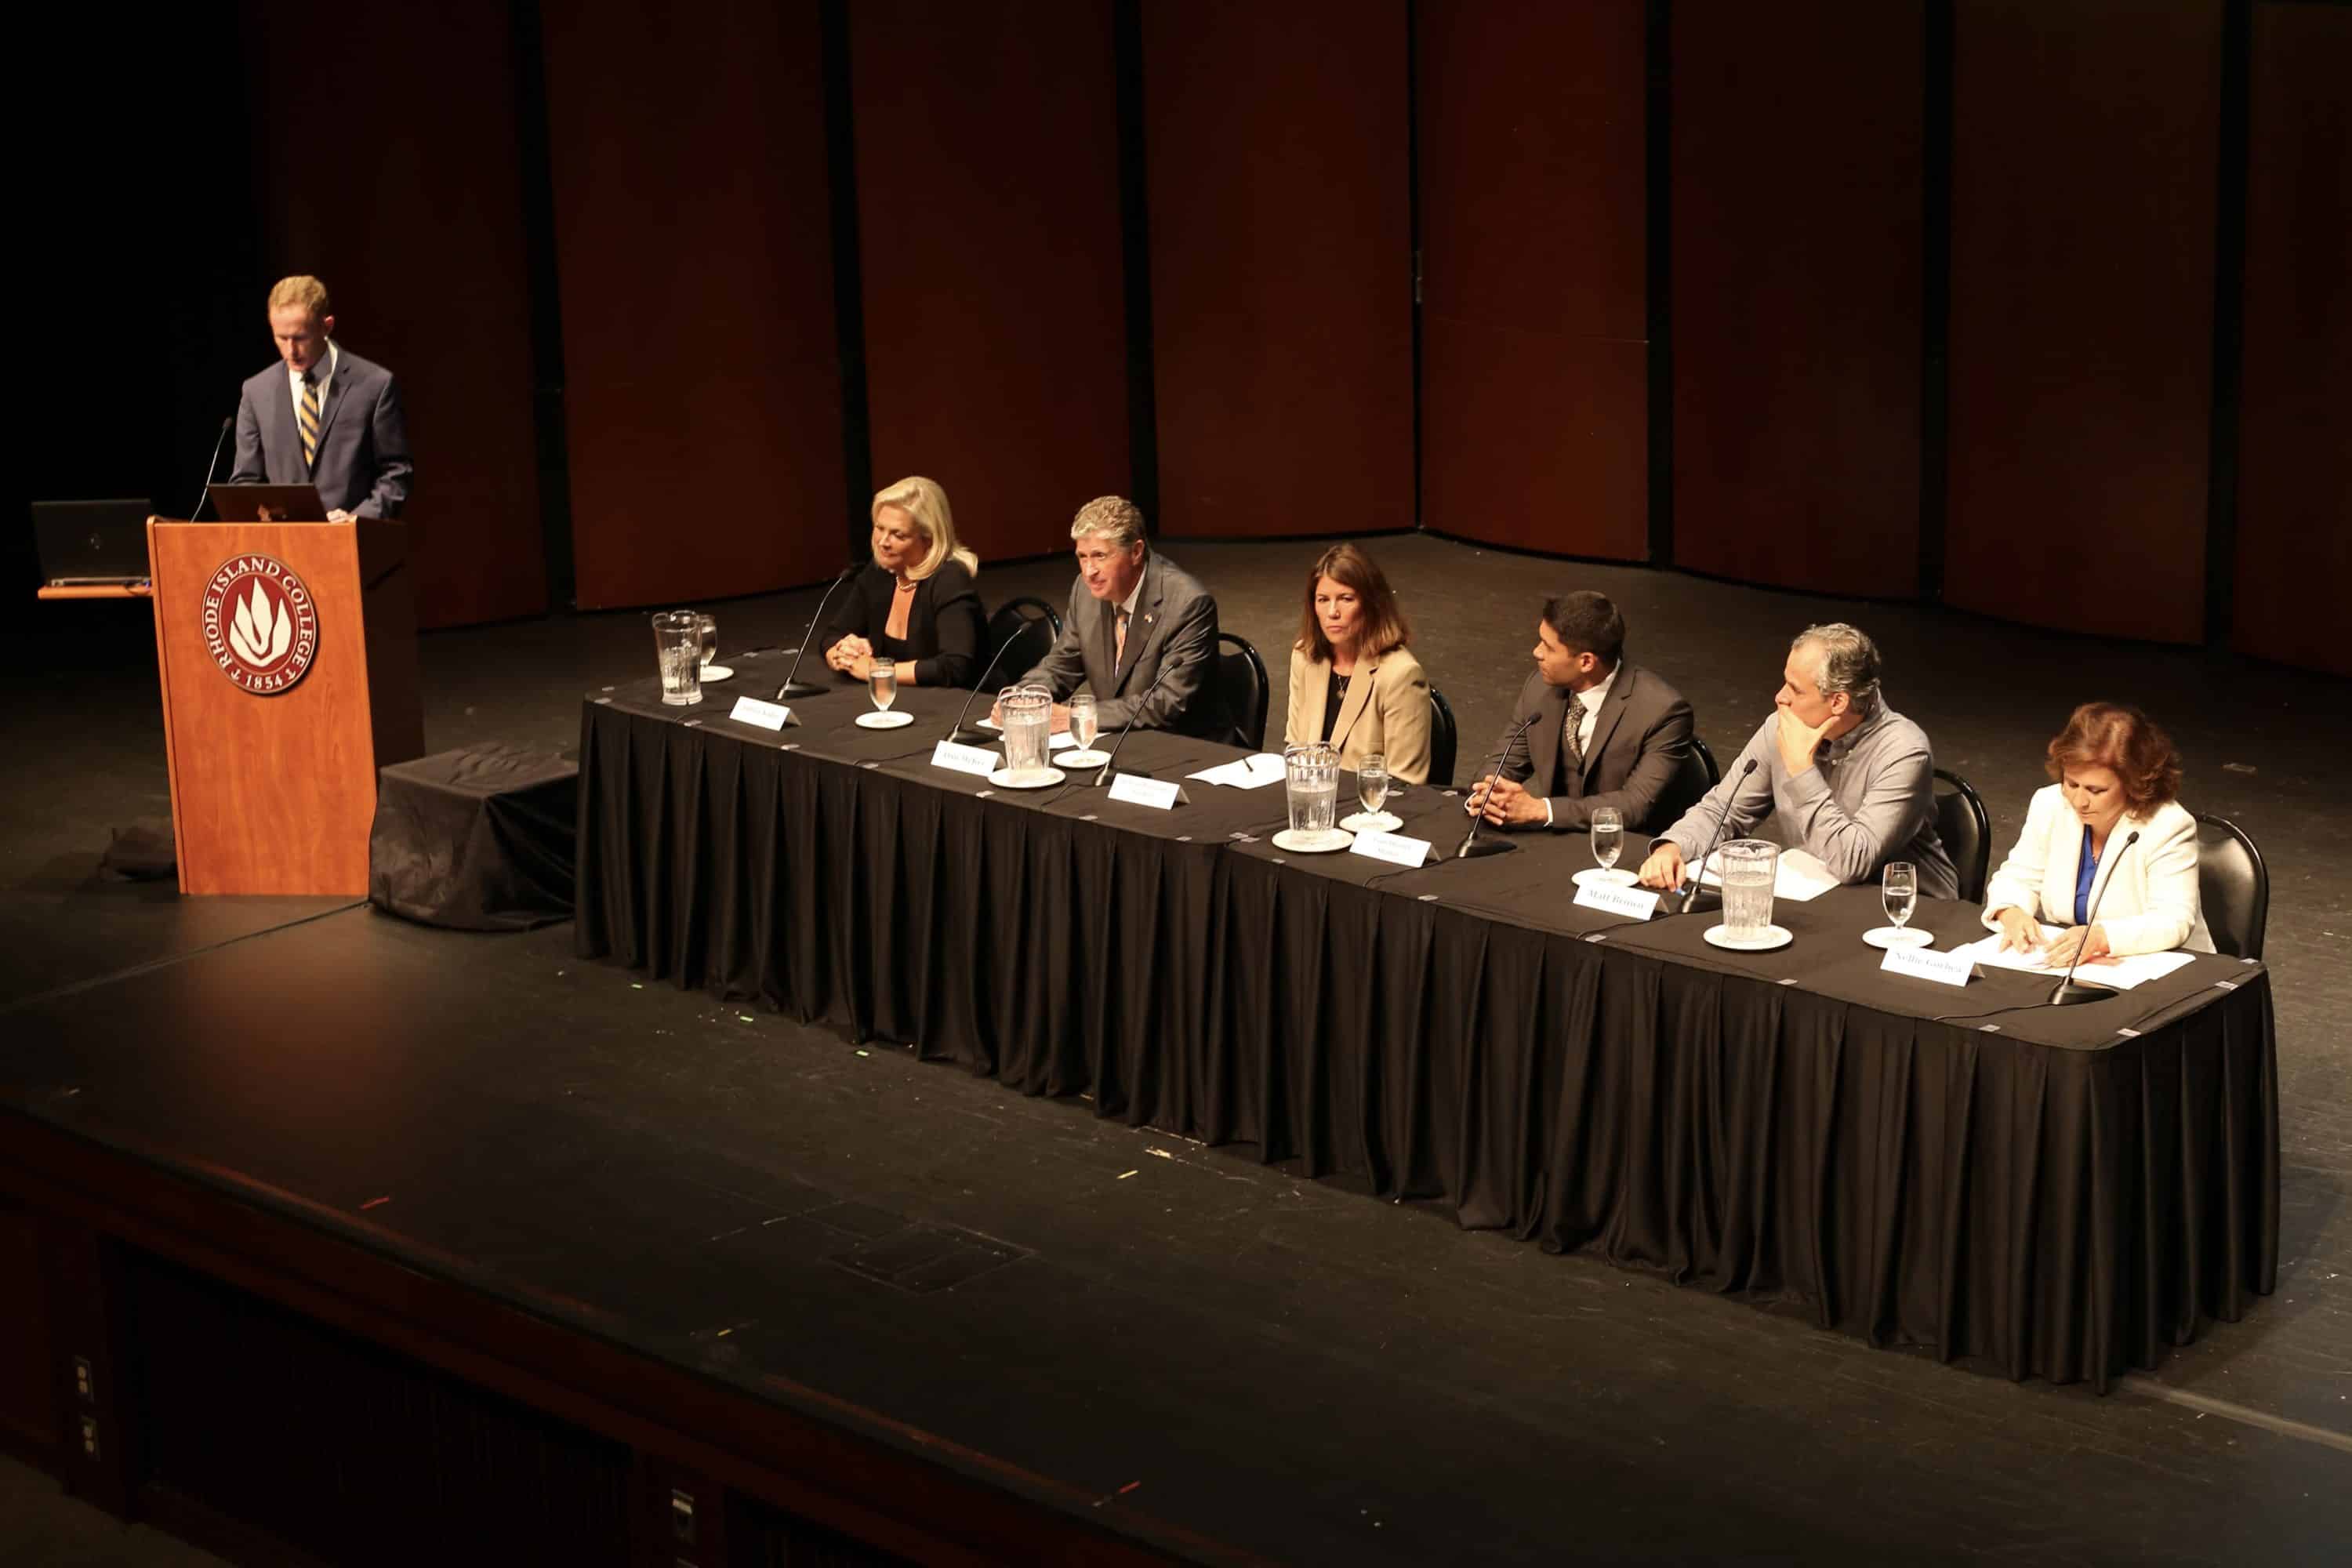 Rhode Island: Candidates for governor grilled on enviro issues at climate forum